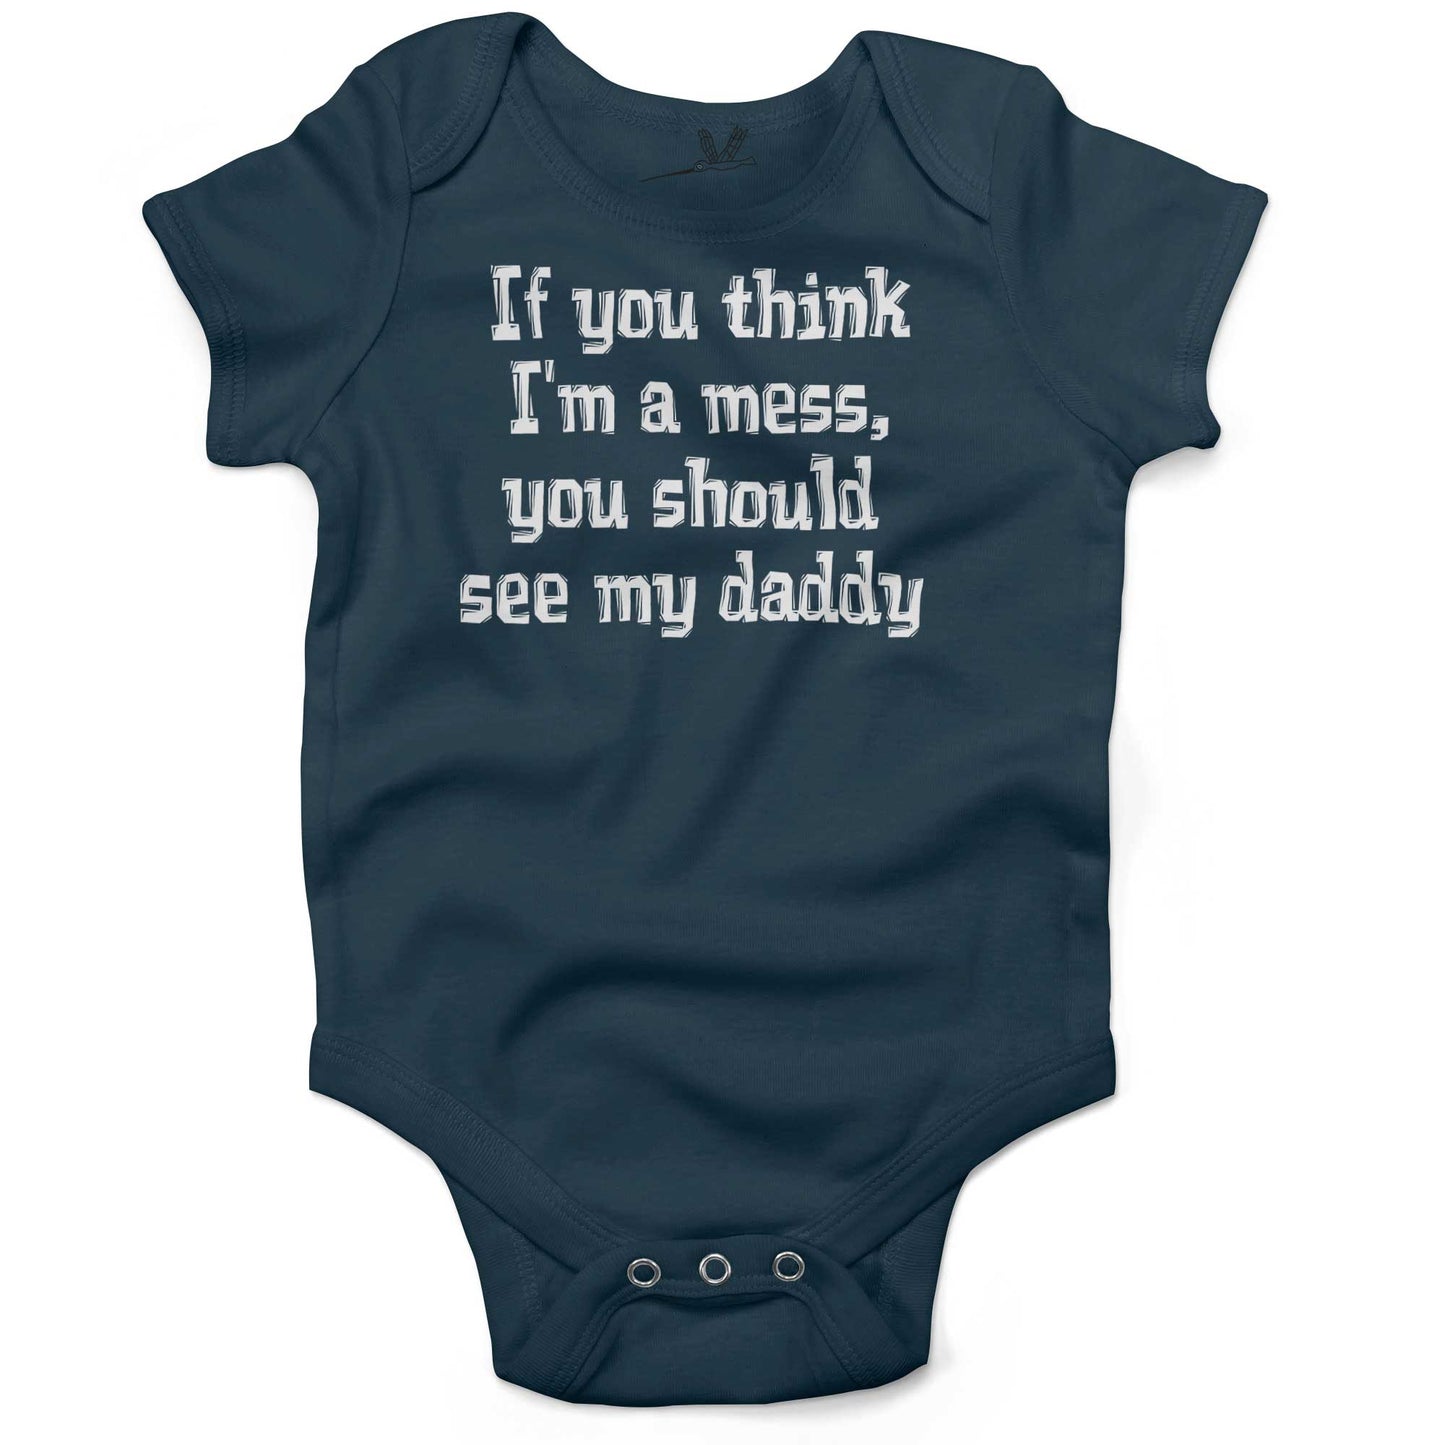 If You Think I'm A Mess, You Should See My Daddy Infant Bodysuit or Raglan Tee-Organic Pacific Blue-3-6 months